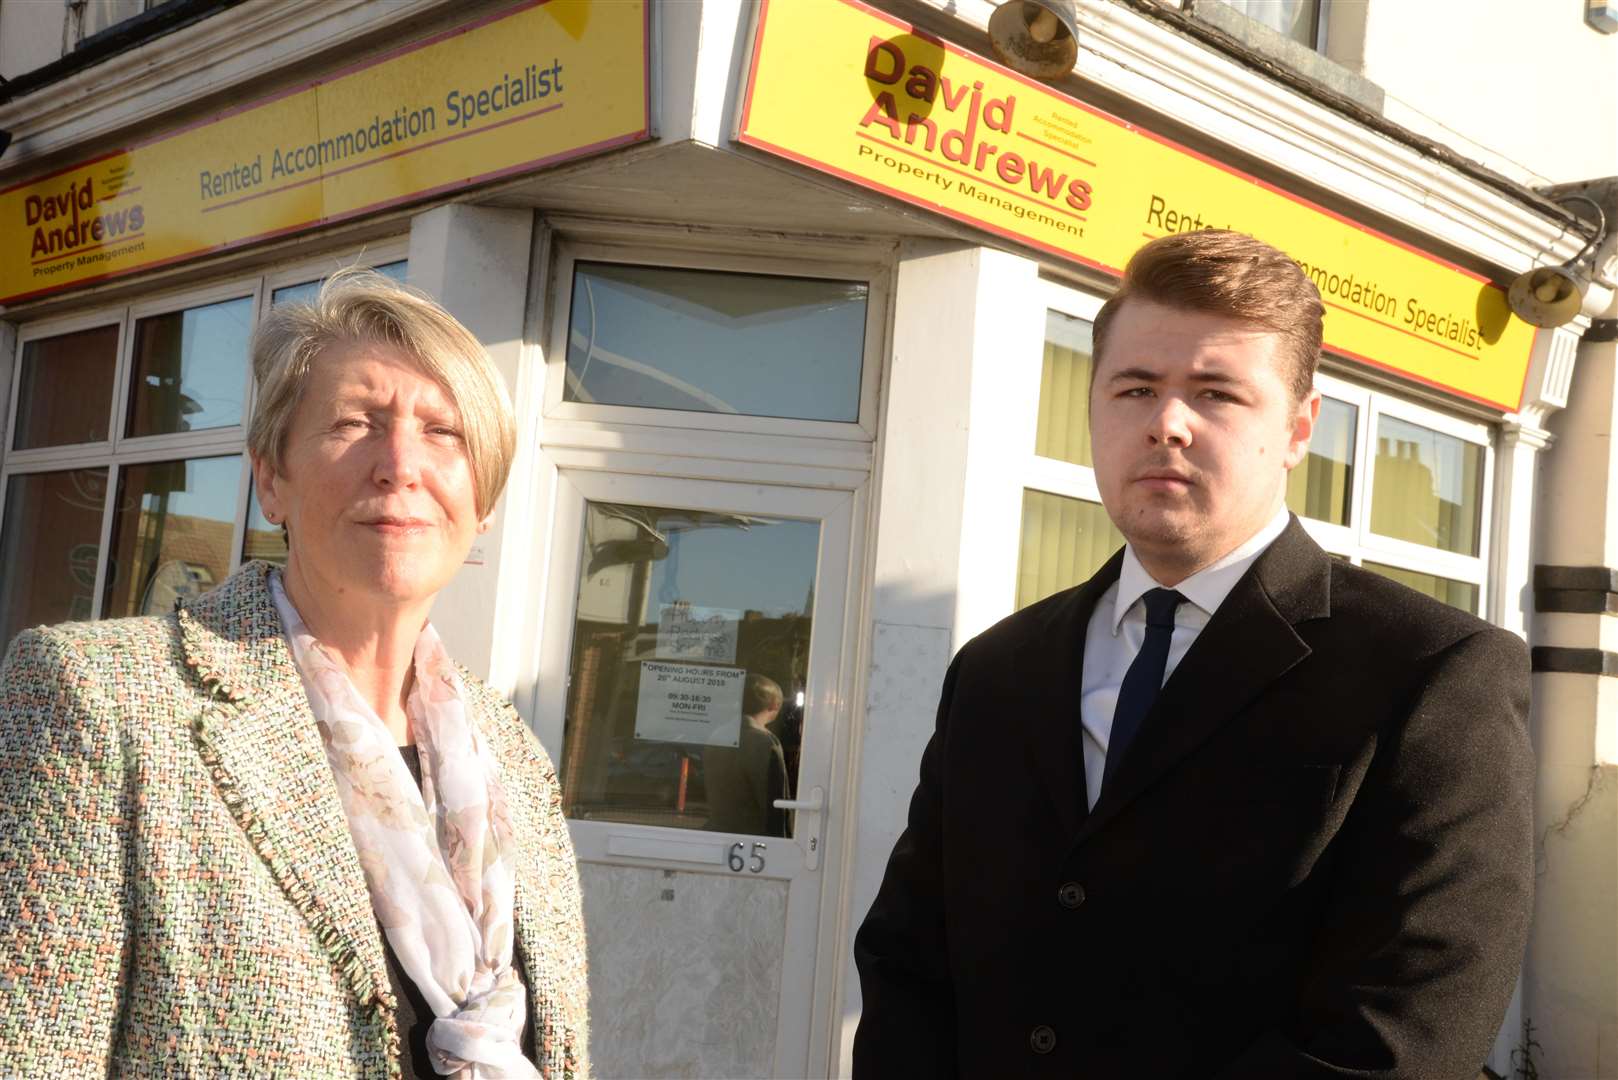 Manager Pat Crosby and senior negotiator Charlie Anderson of the David Andrews Letting Agency in Gillingham. Picture: Chris Davey